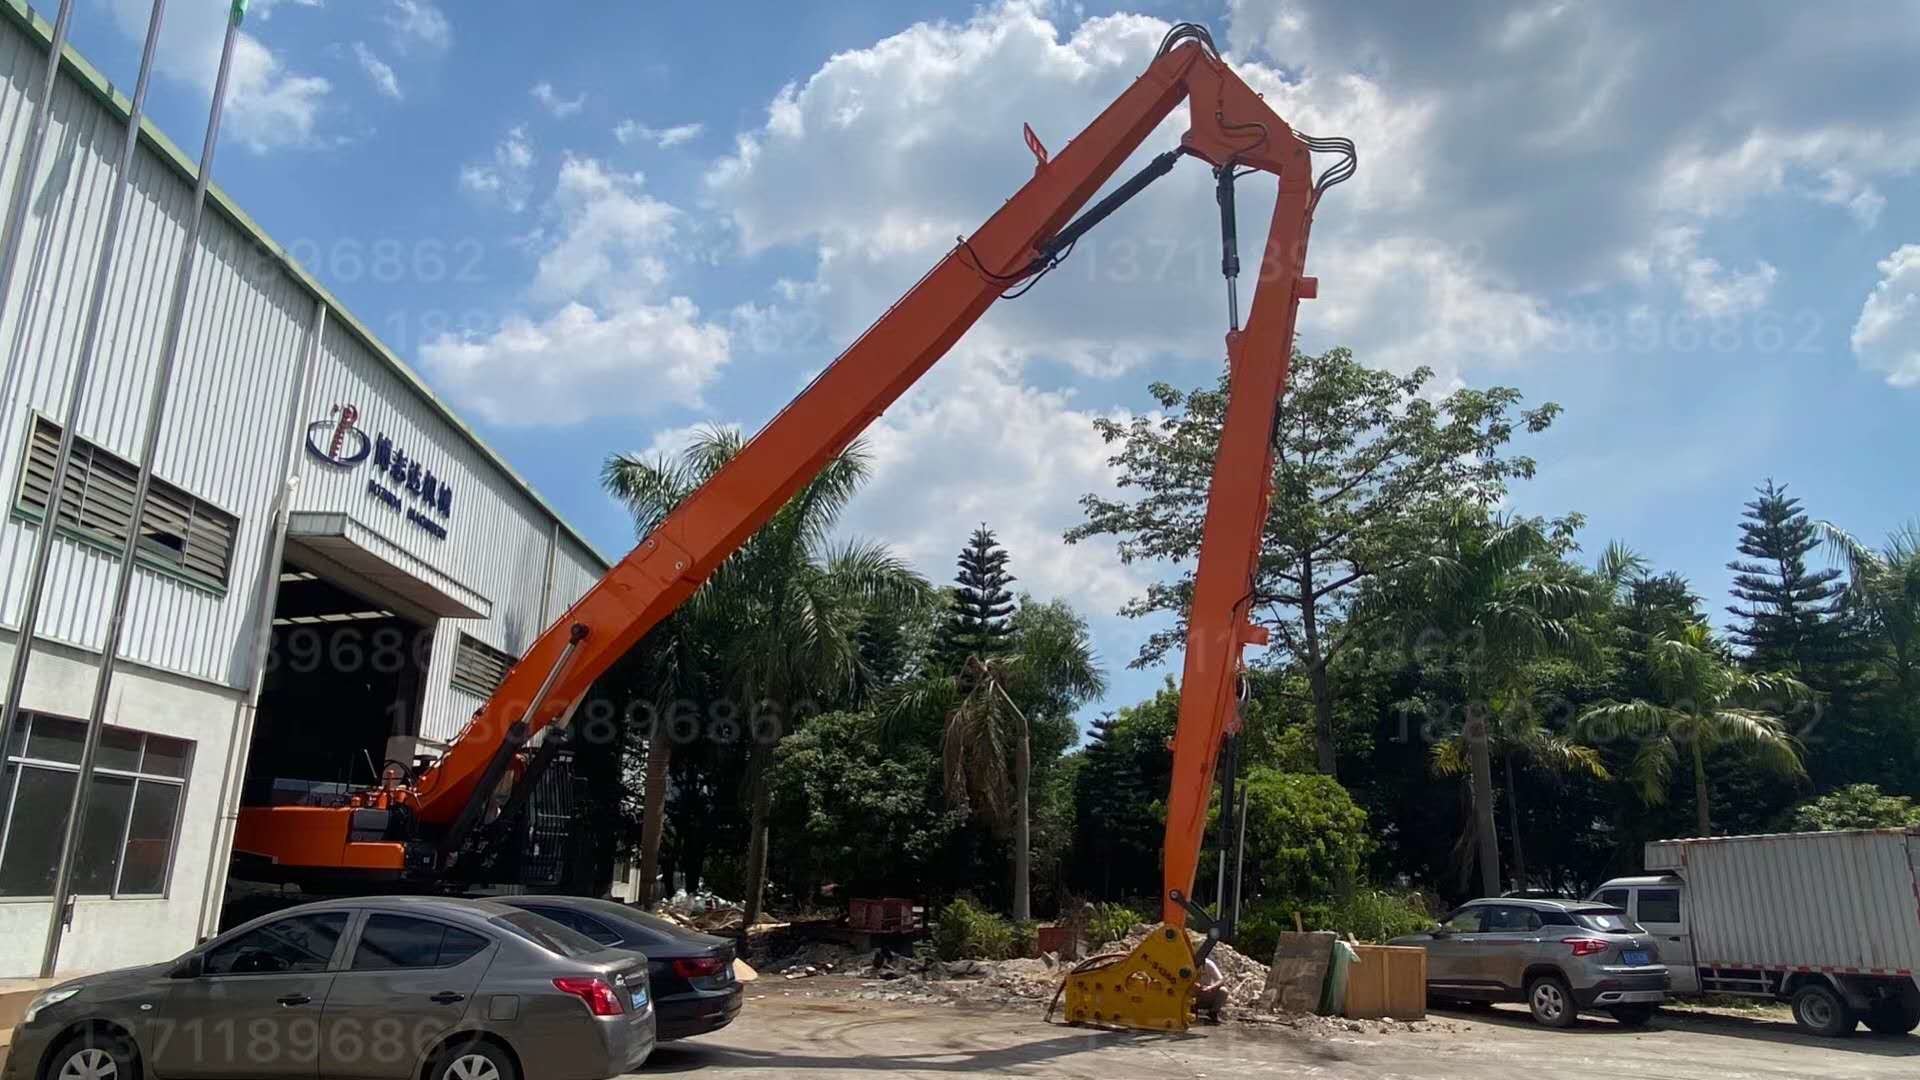 Doosan DX500 excavator 30m high reach demolition arm with Q690 steel material for building demolish and removal